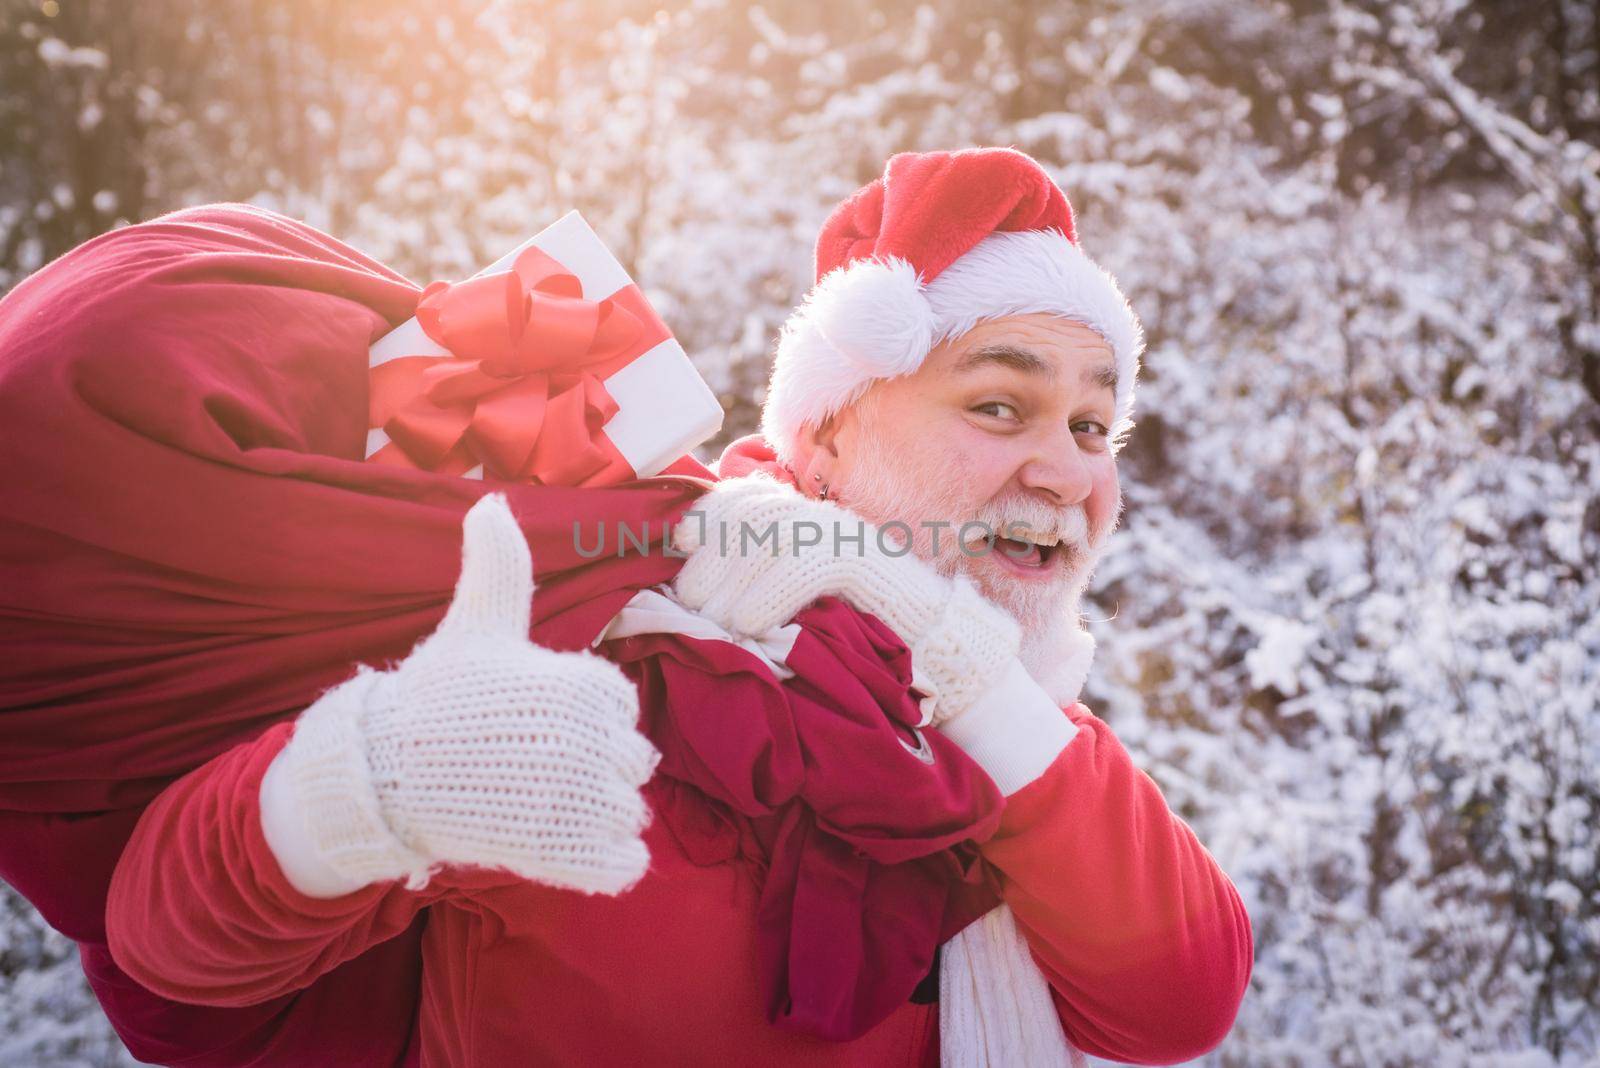 Santa Claus comes with thumb up in the snow forest, senior thumbs up sign